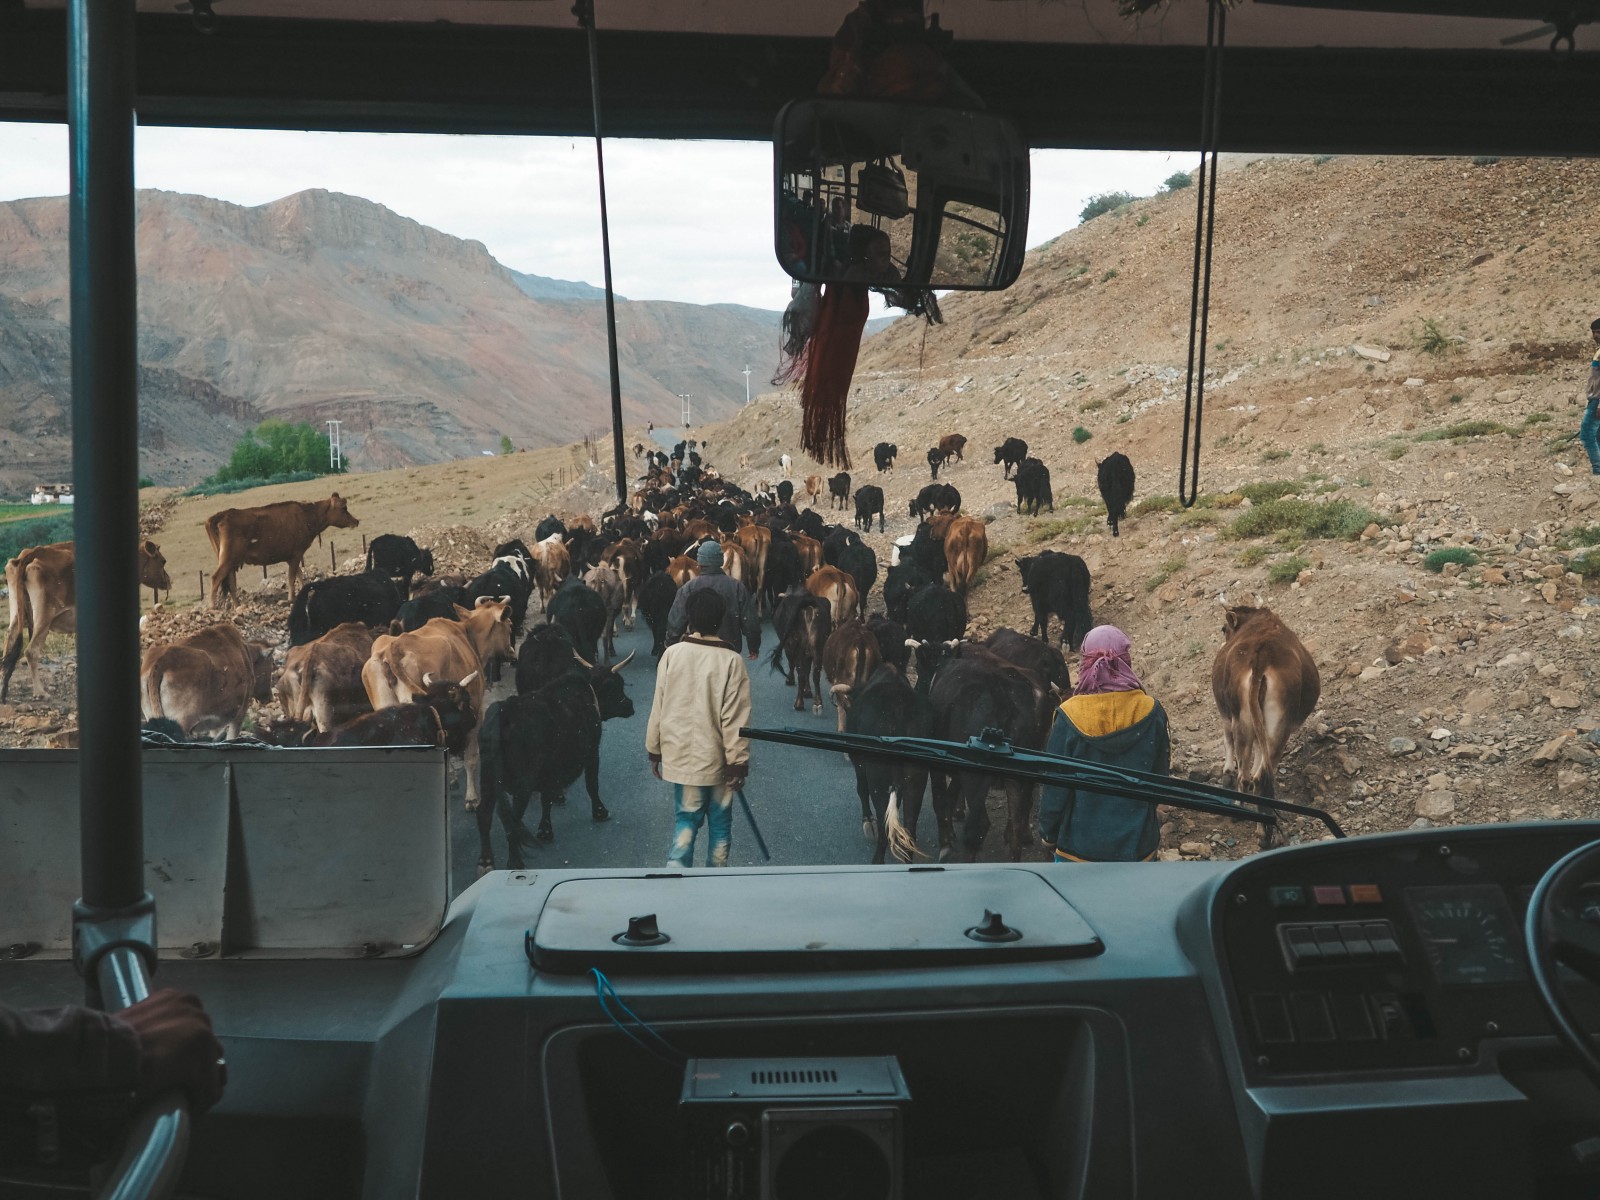 Many cows standing on the road in Spiti Valley